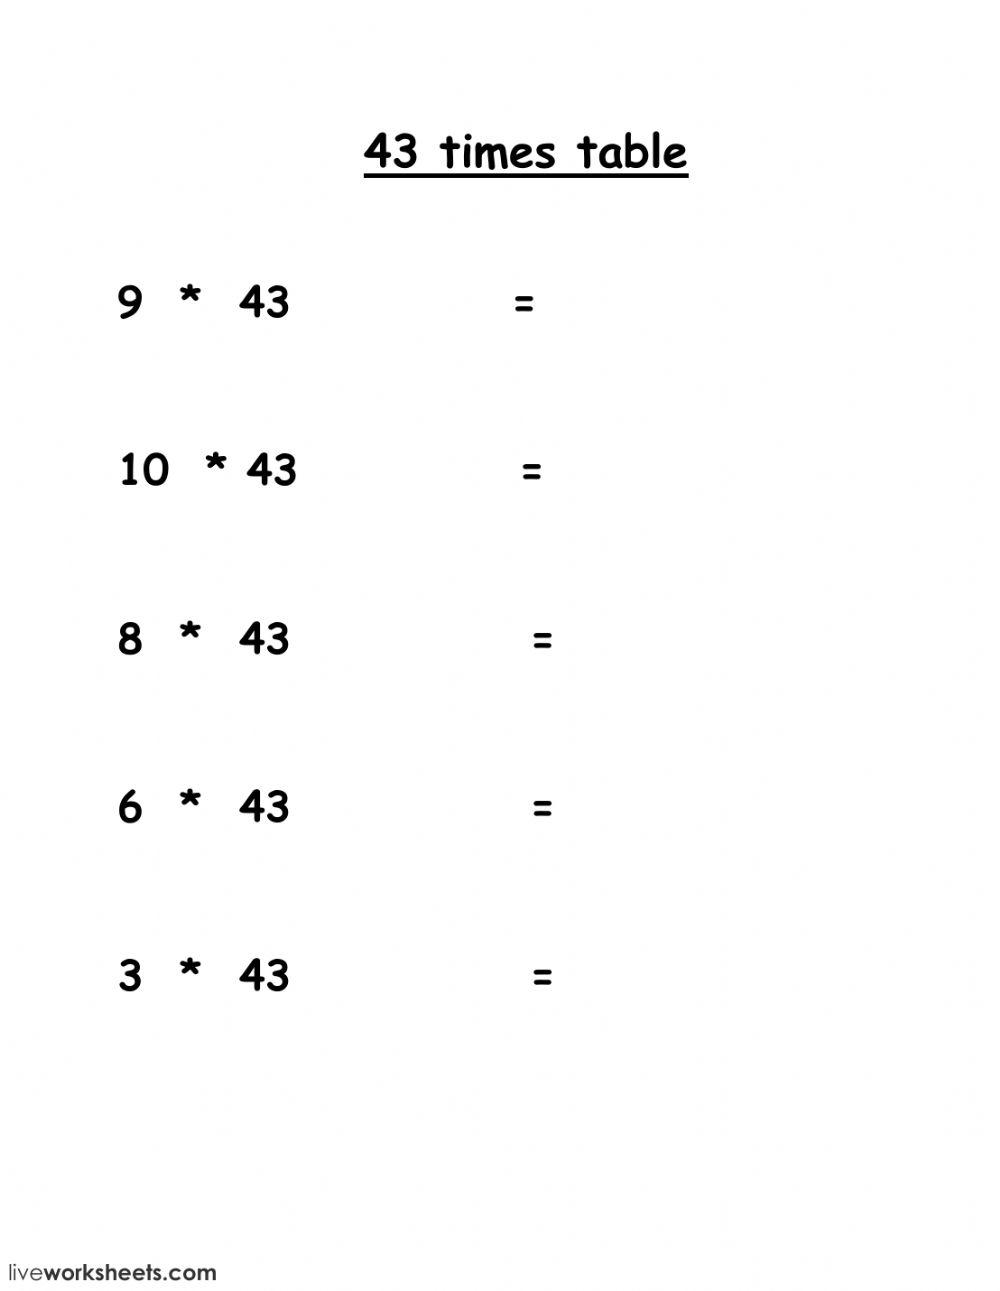 43 times table